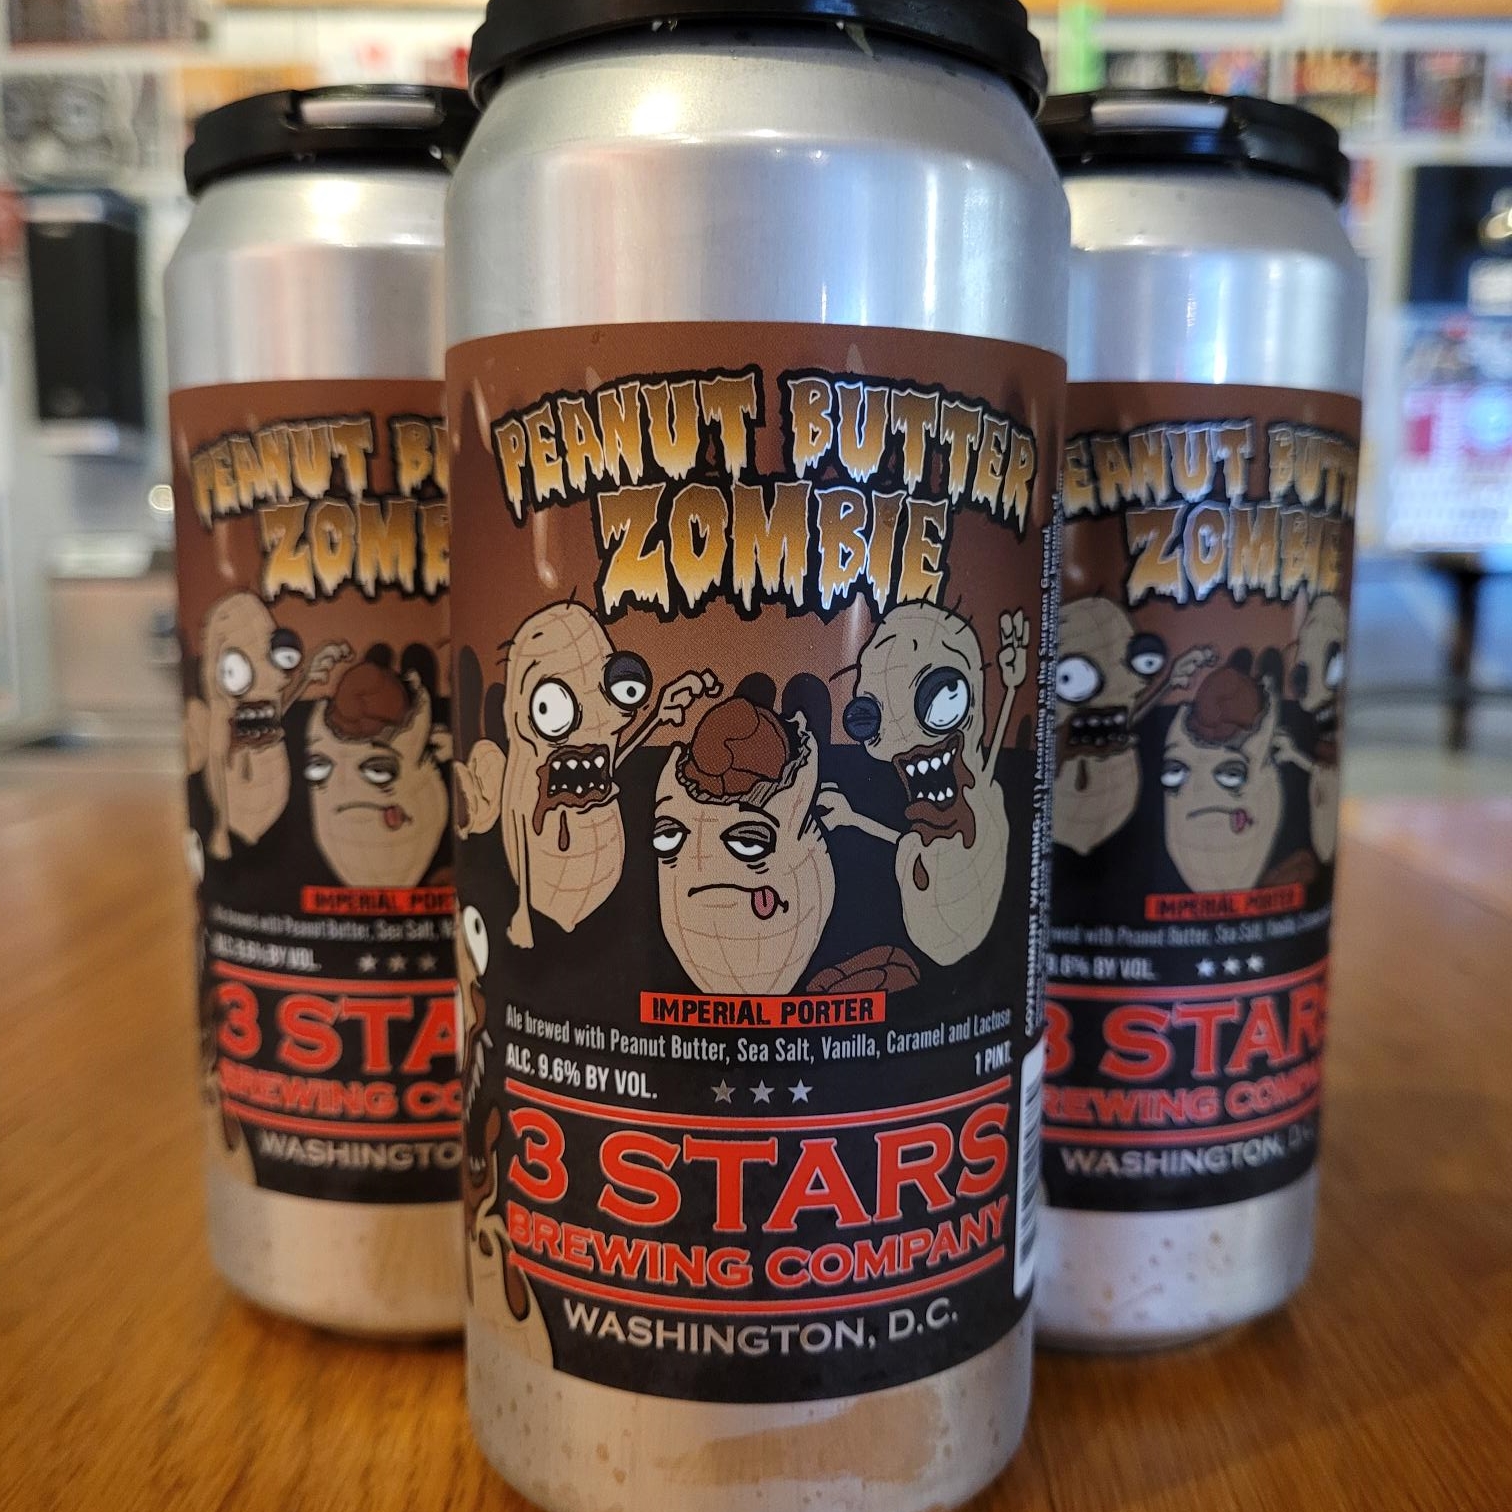 Category: Cans | 3 Stars Brewing Company